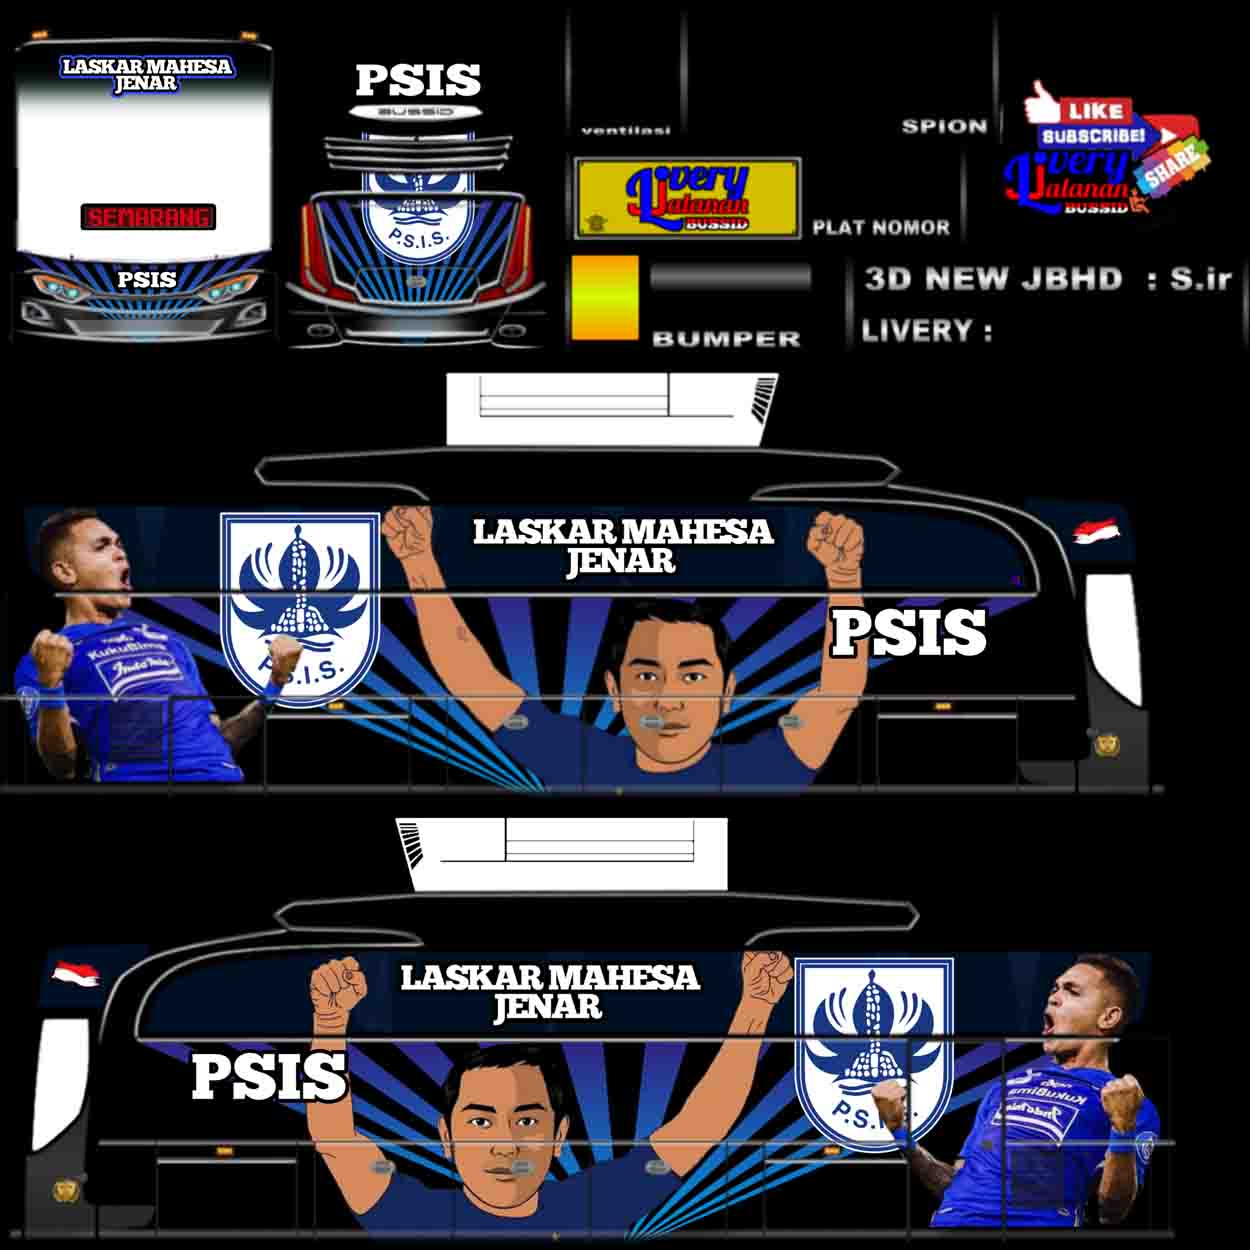 livery bus psis